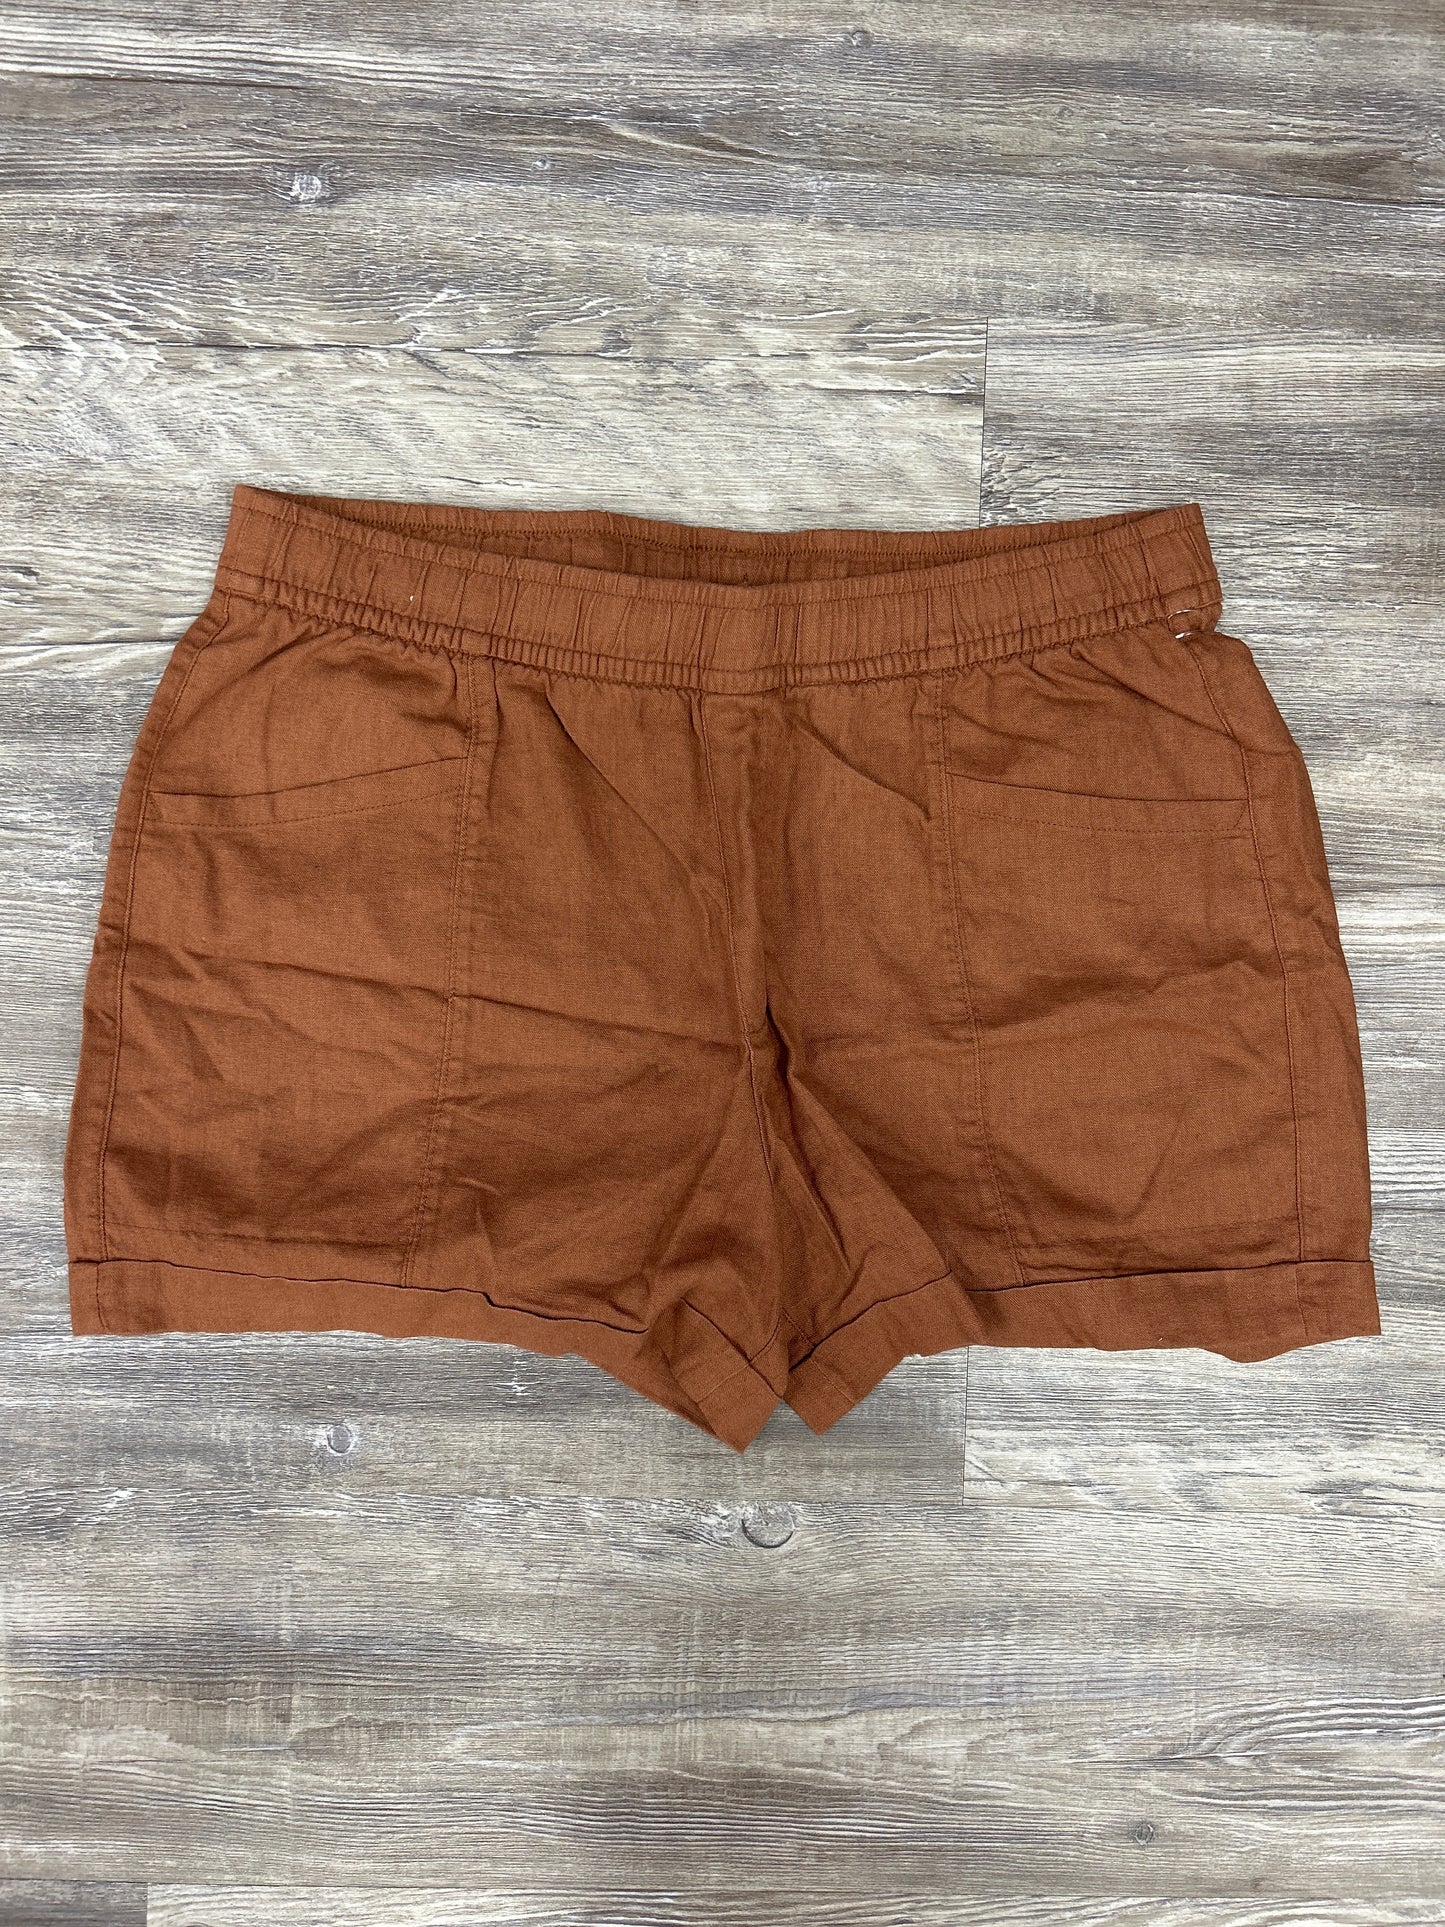 Brown Shorts Old Navy, Size L